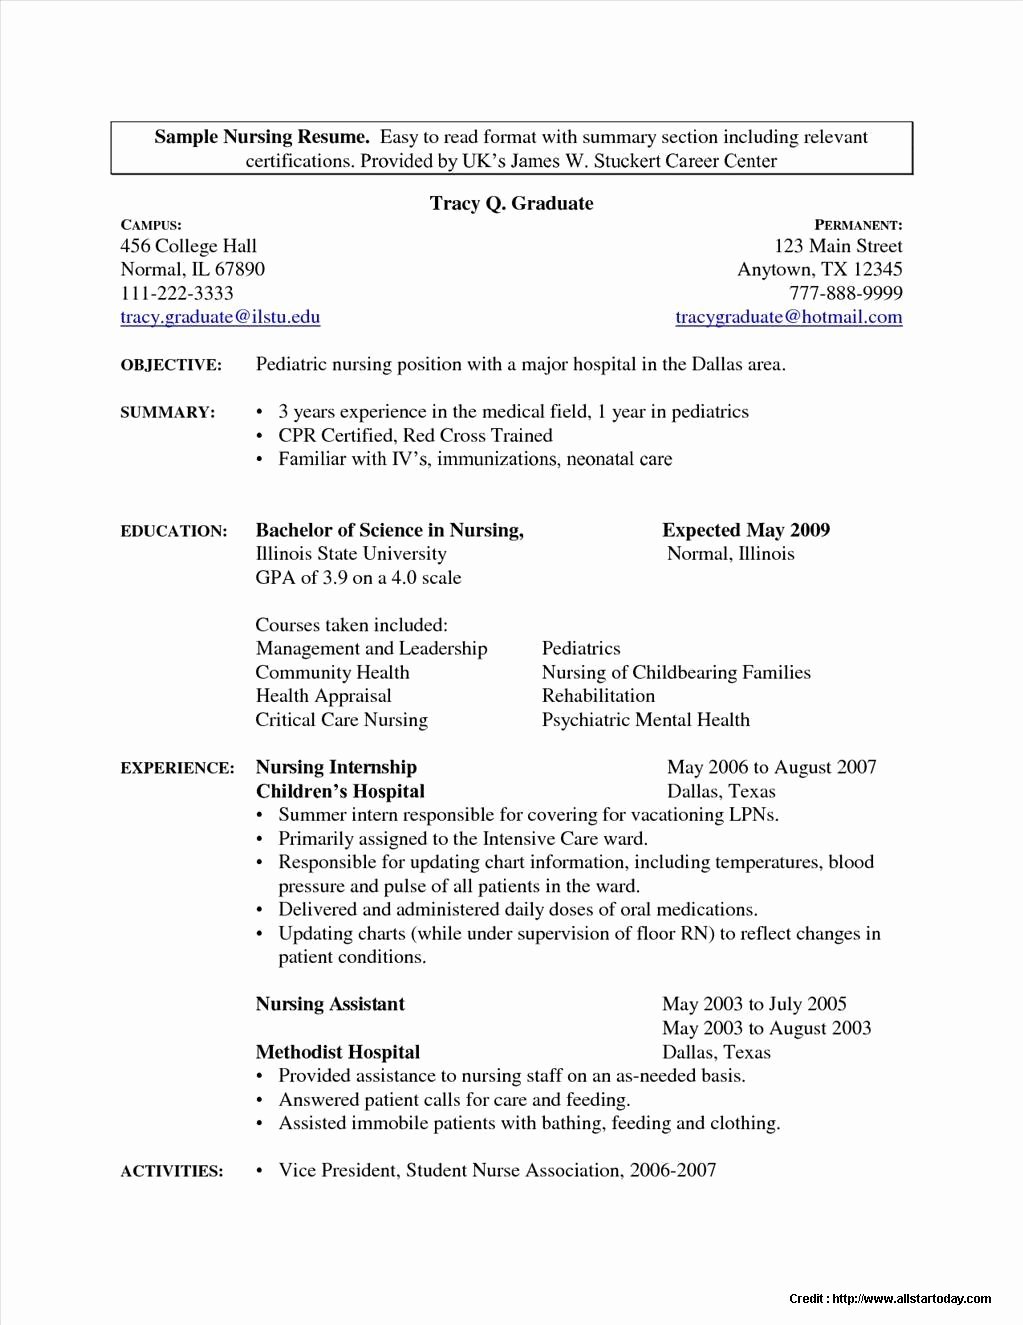 Resume Template for Medical assistant New Sample Resumes for Medical assistant Students Resume